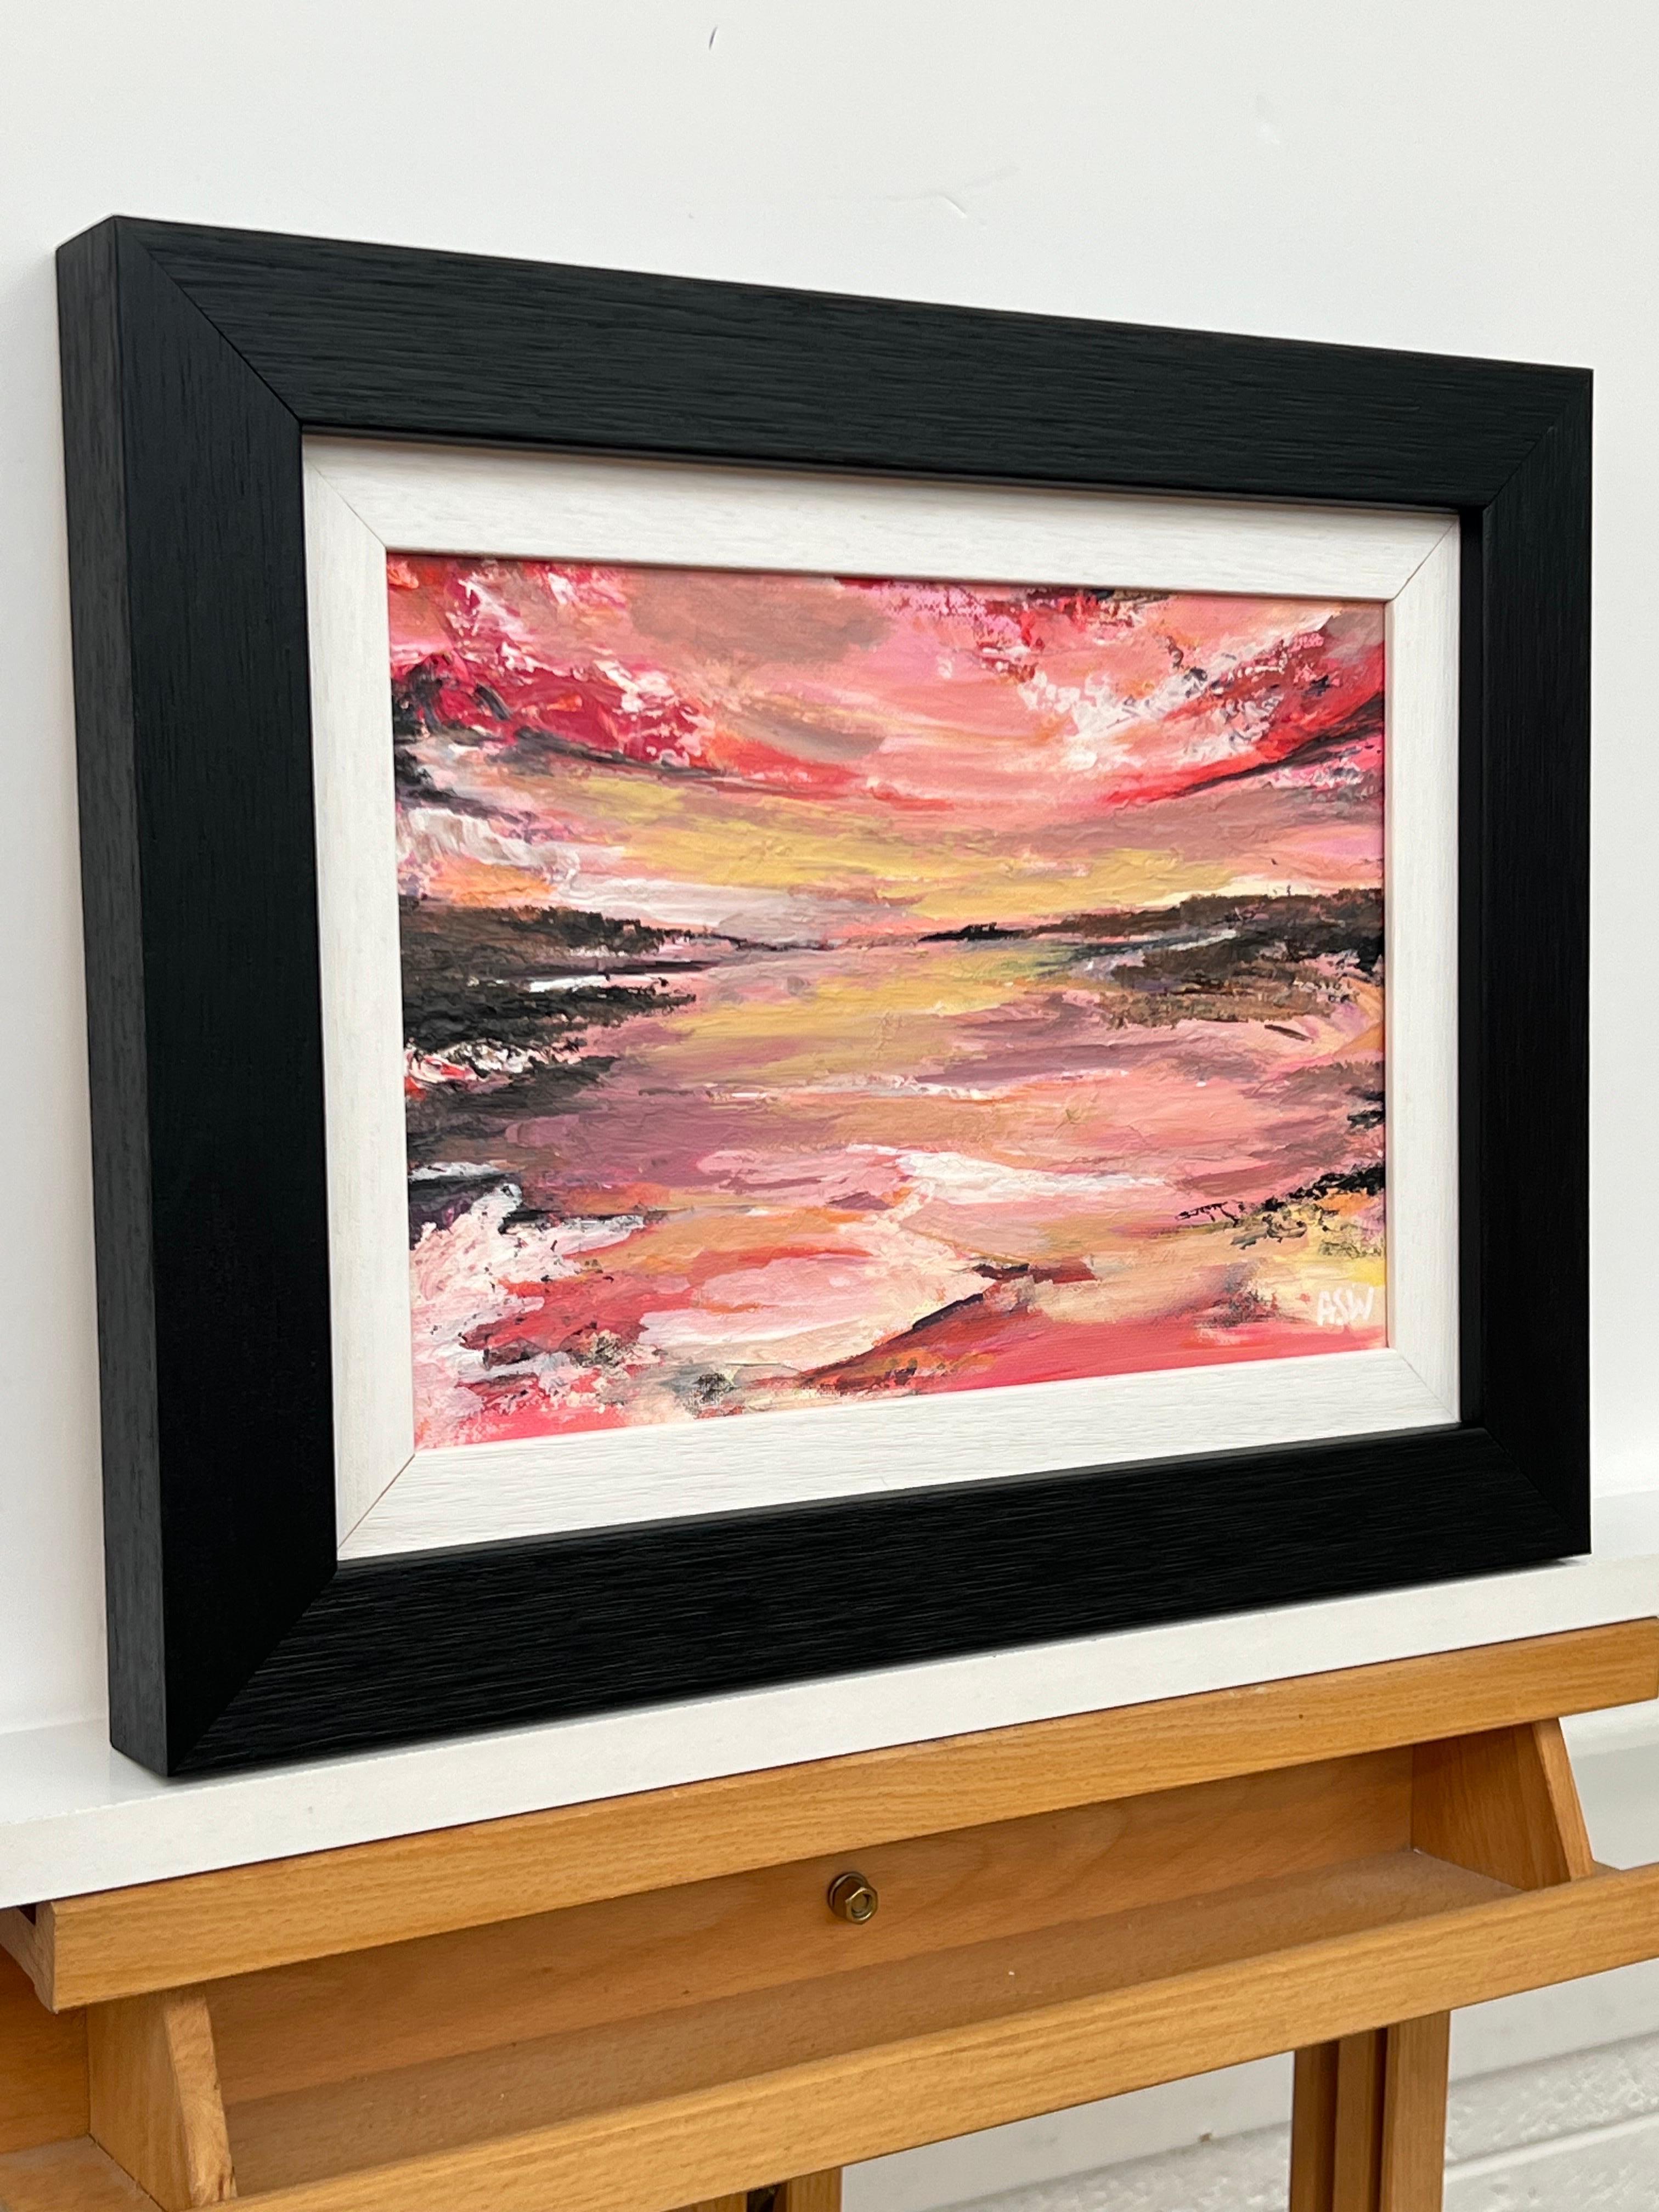 Impasto Abstract Landscape Seascape Painting with Pink Red Black & Golden Yellow by British Contemporary Artist, Angela Wakefield

Art measures 12 x 8 inches
Frame measures 17 x 13 inches

This painting portrays a vibrant sunset over a coastal